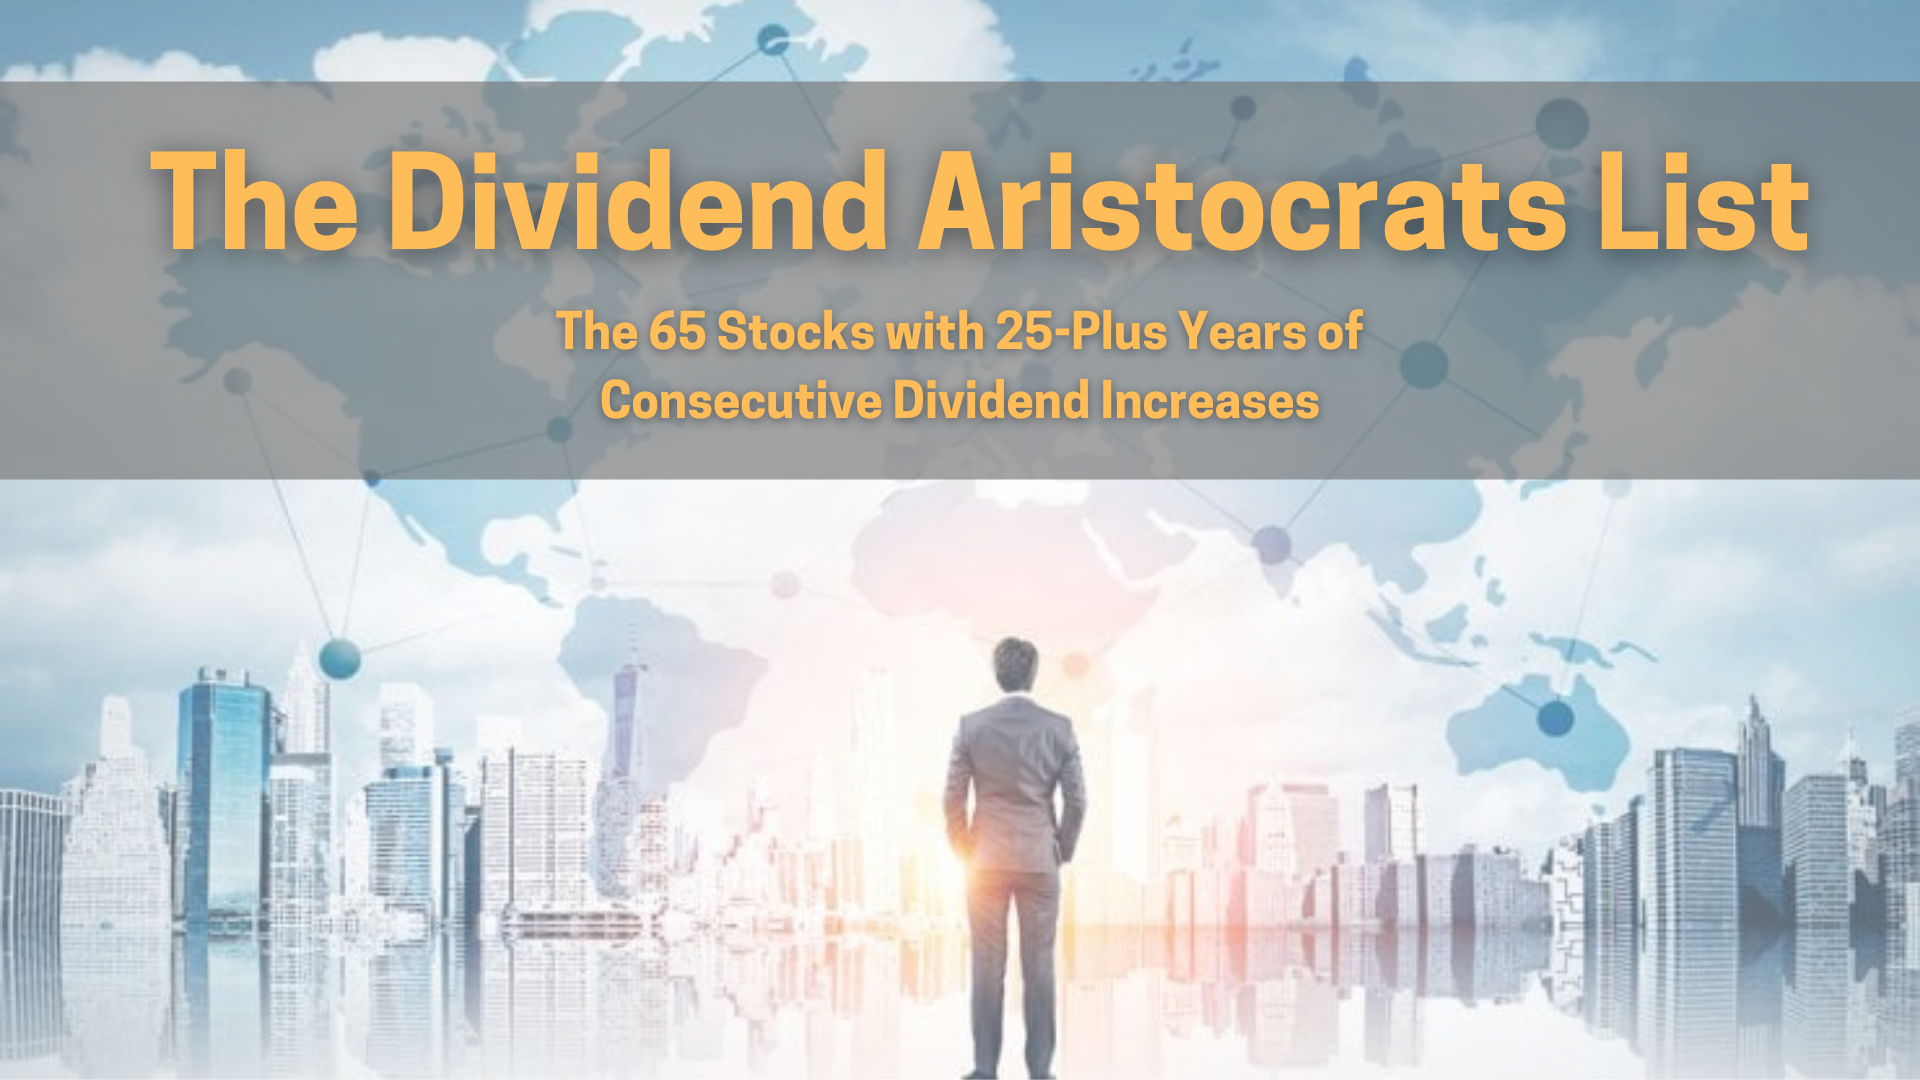 The Dividend Aristocrats List Features 65 Stocks With 25Plus Years of